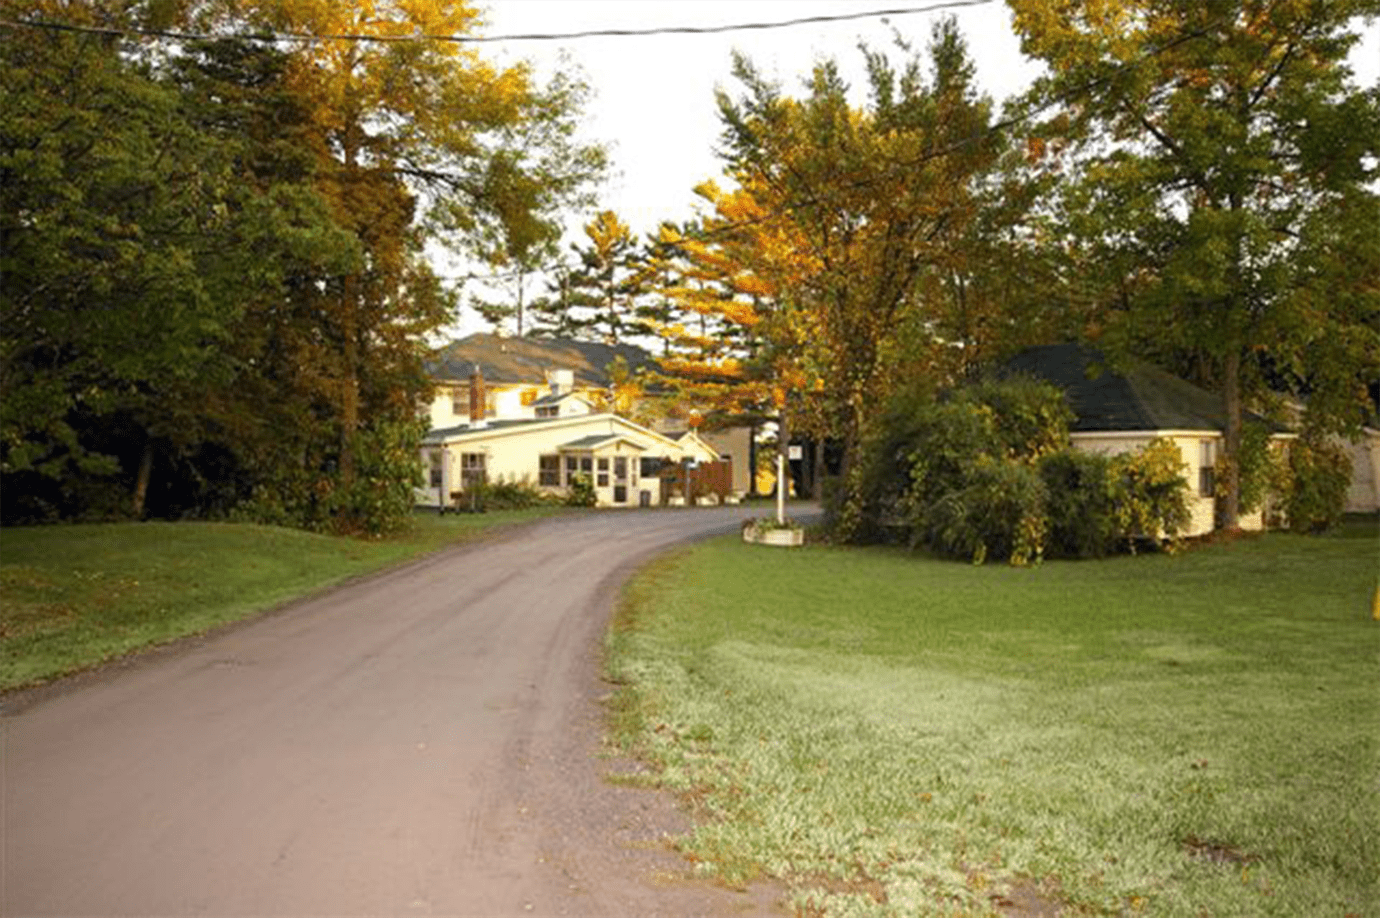 Inn exterior and driveway